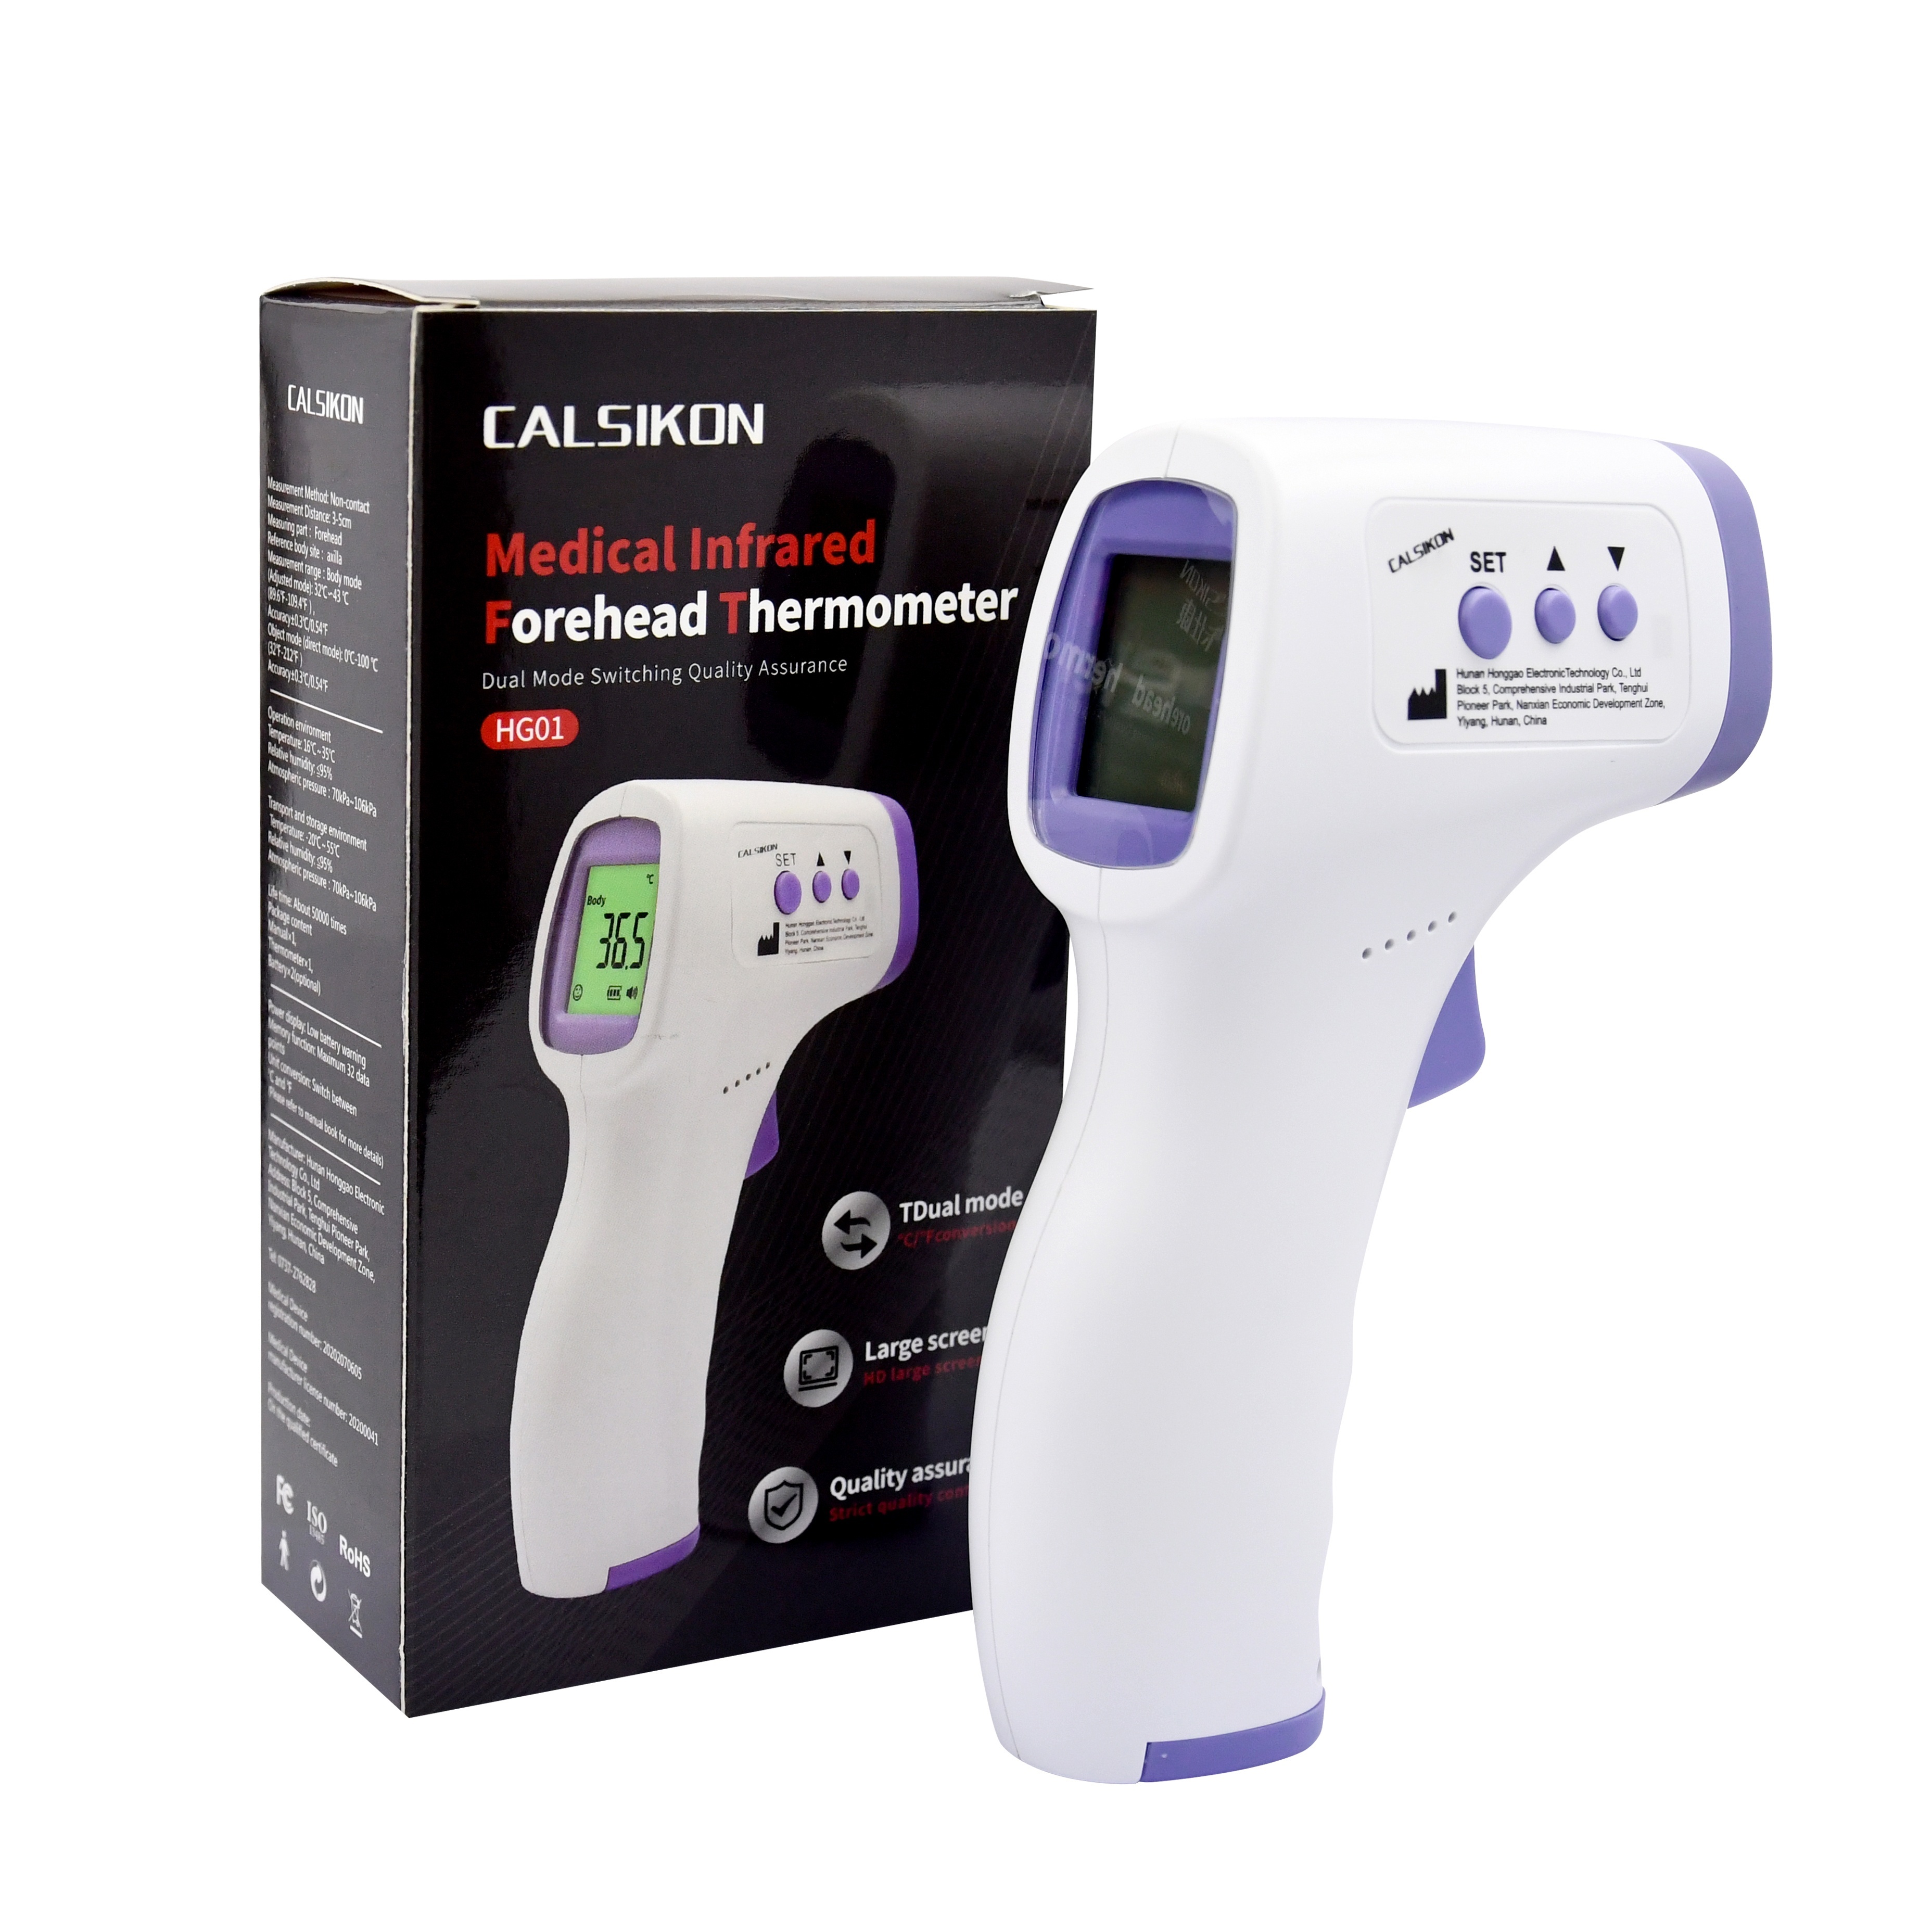 Digital Oral LCD Fever Thermometer For Adult, Baby, Kids, Digital  Thermometer